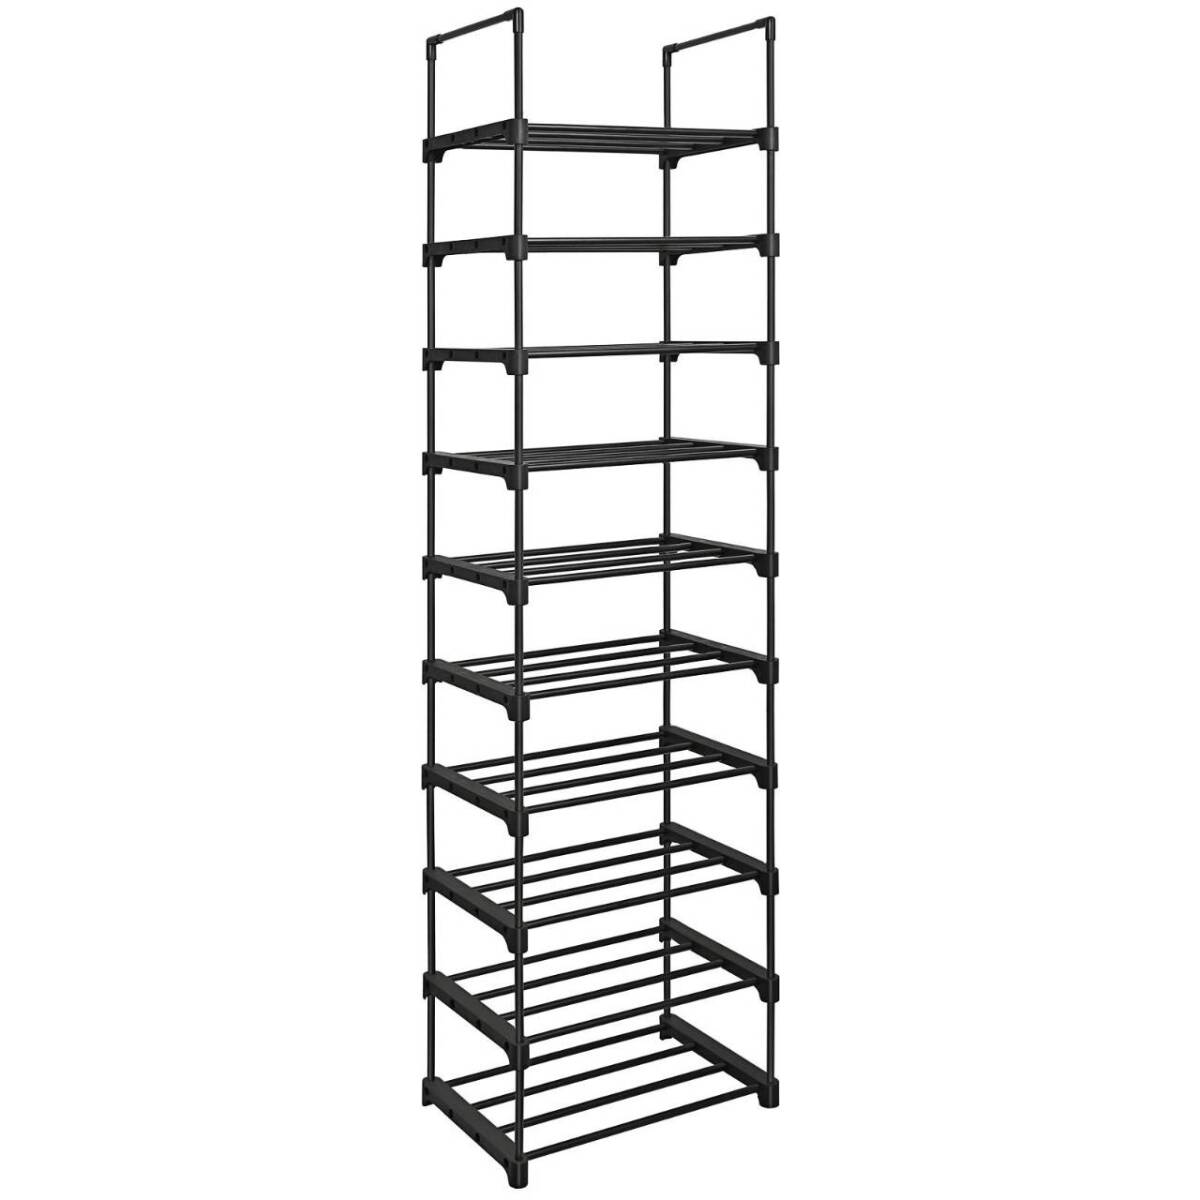  high capacity. 10 step shoes rack, many. shoes . storage possibility 